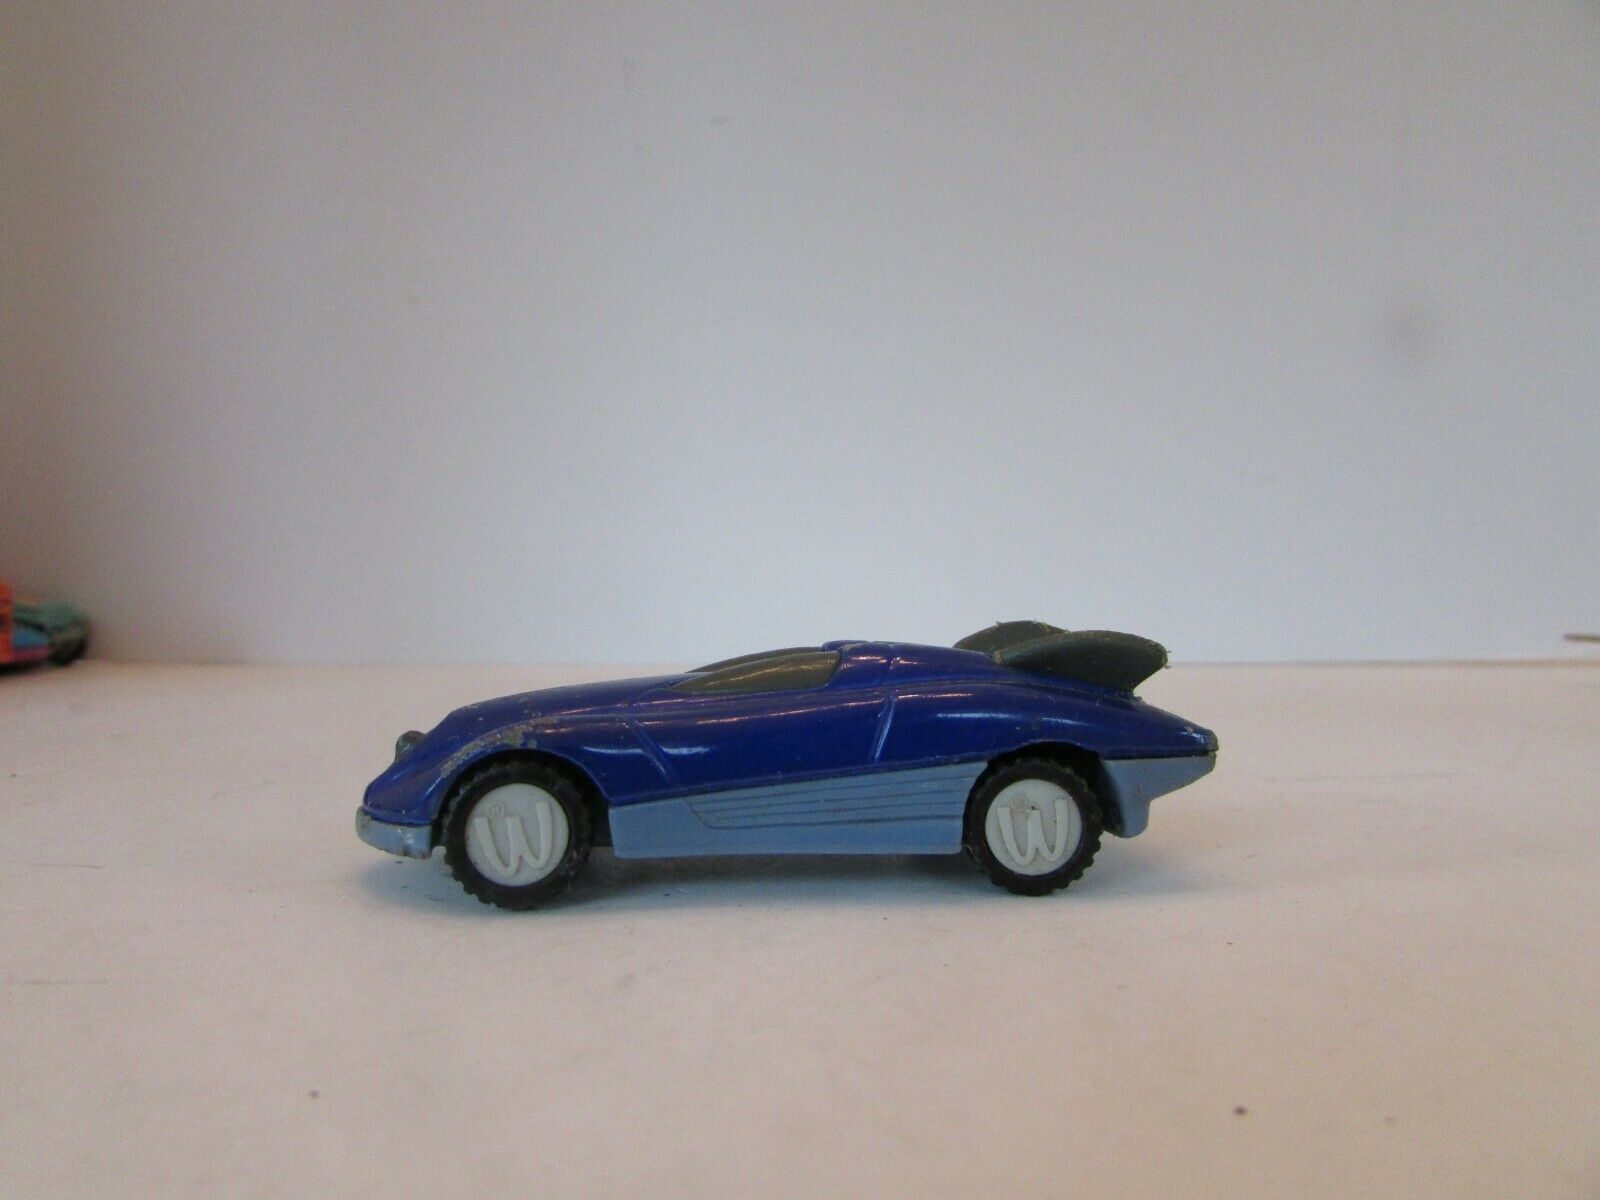 Primary image for MATTEL 1994 HOT WHEELS DIECAST CAR BLUE MC 8 CHINA TURBO CAR  H2